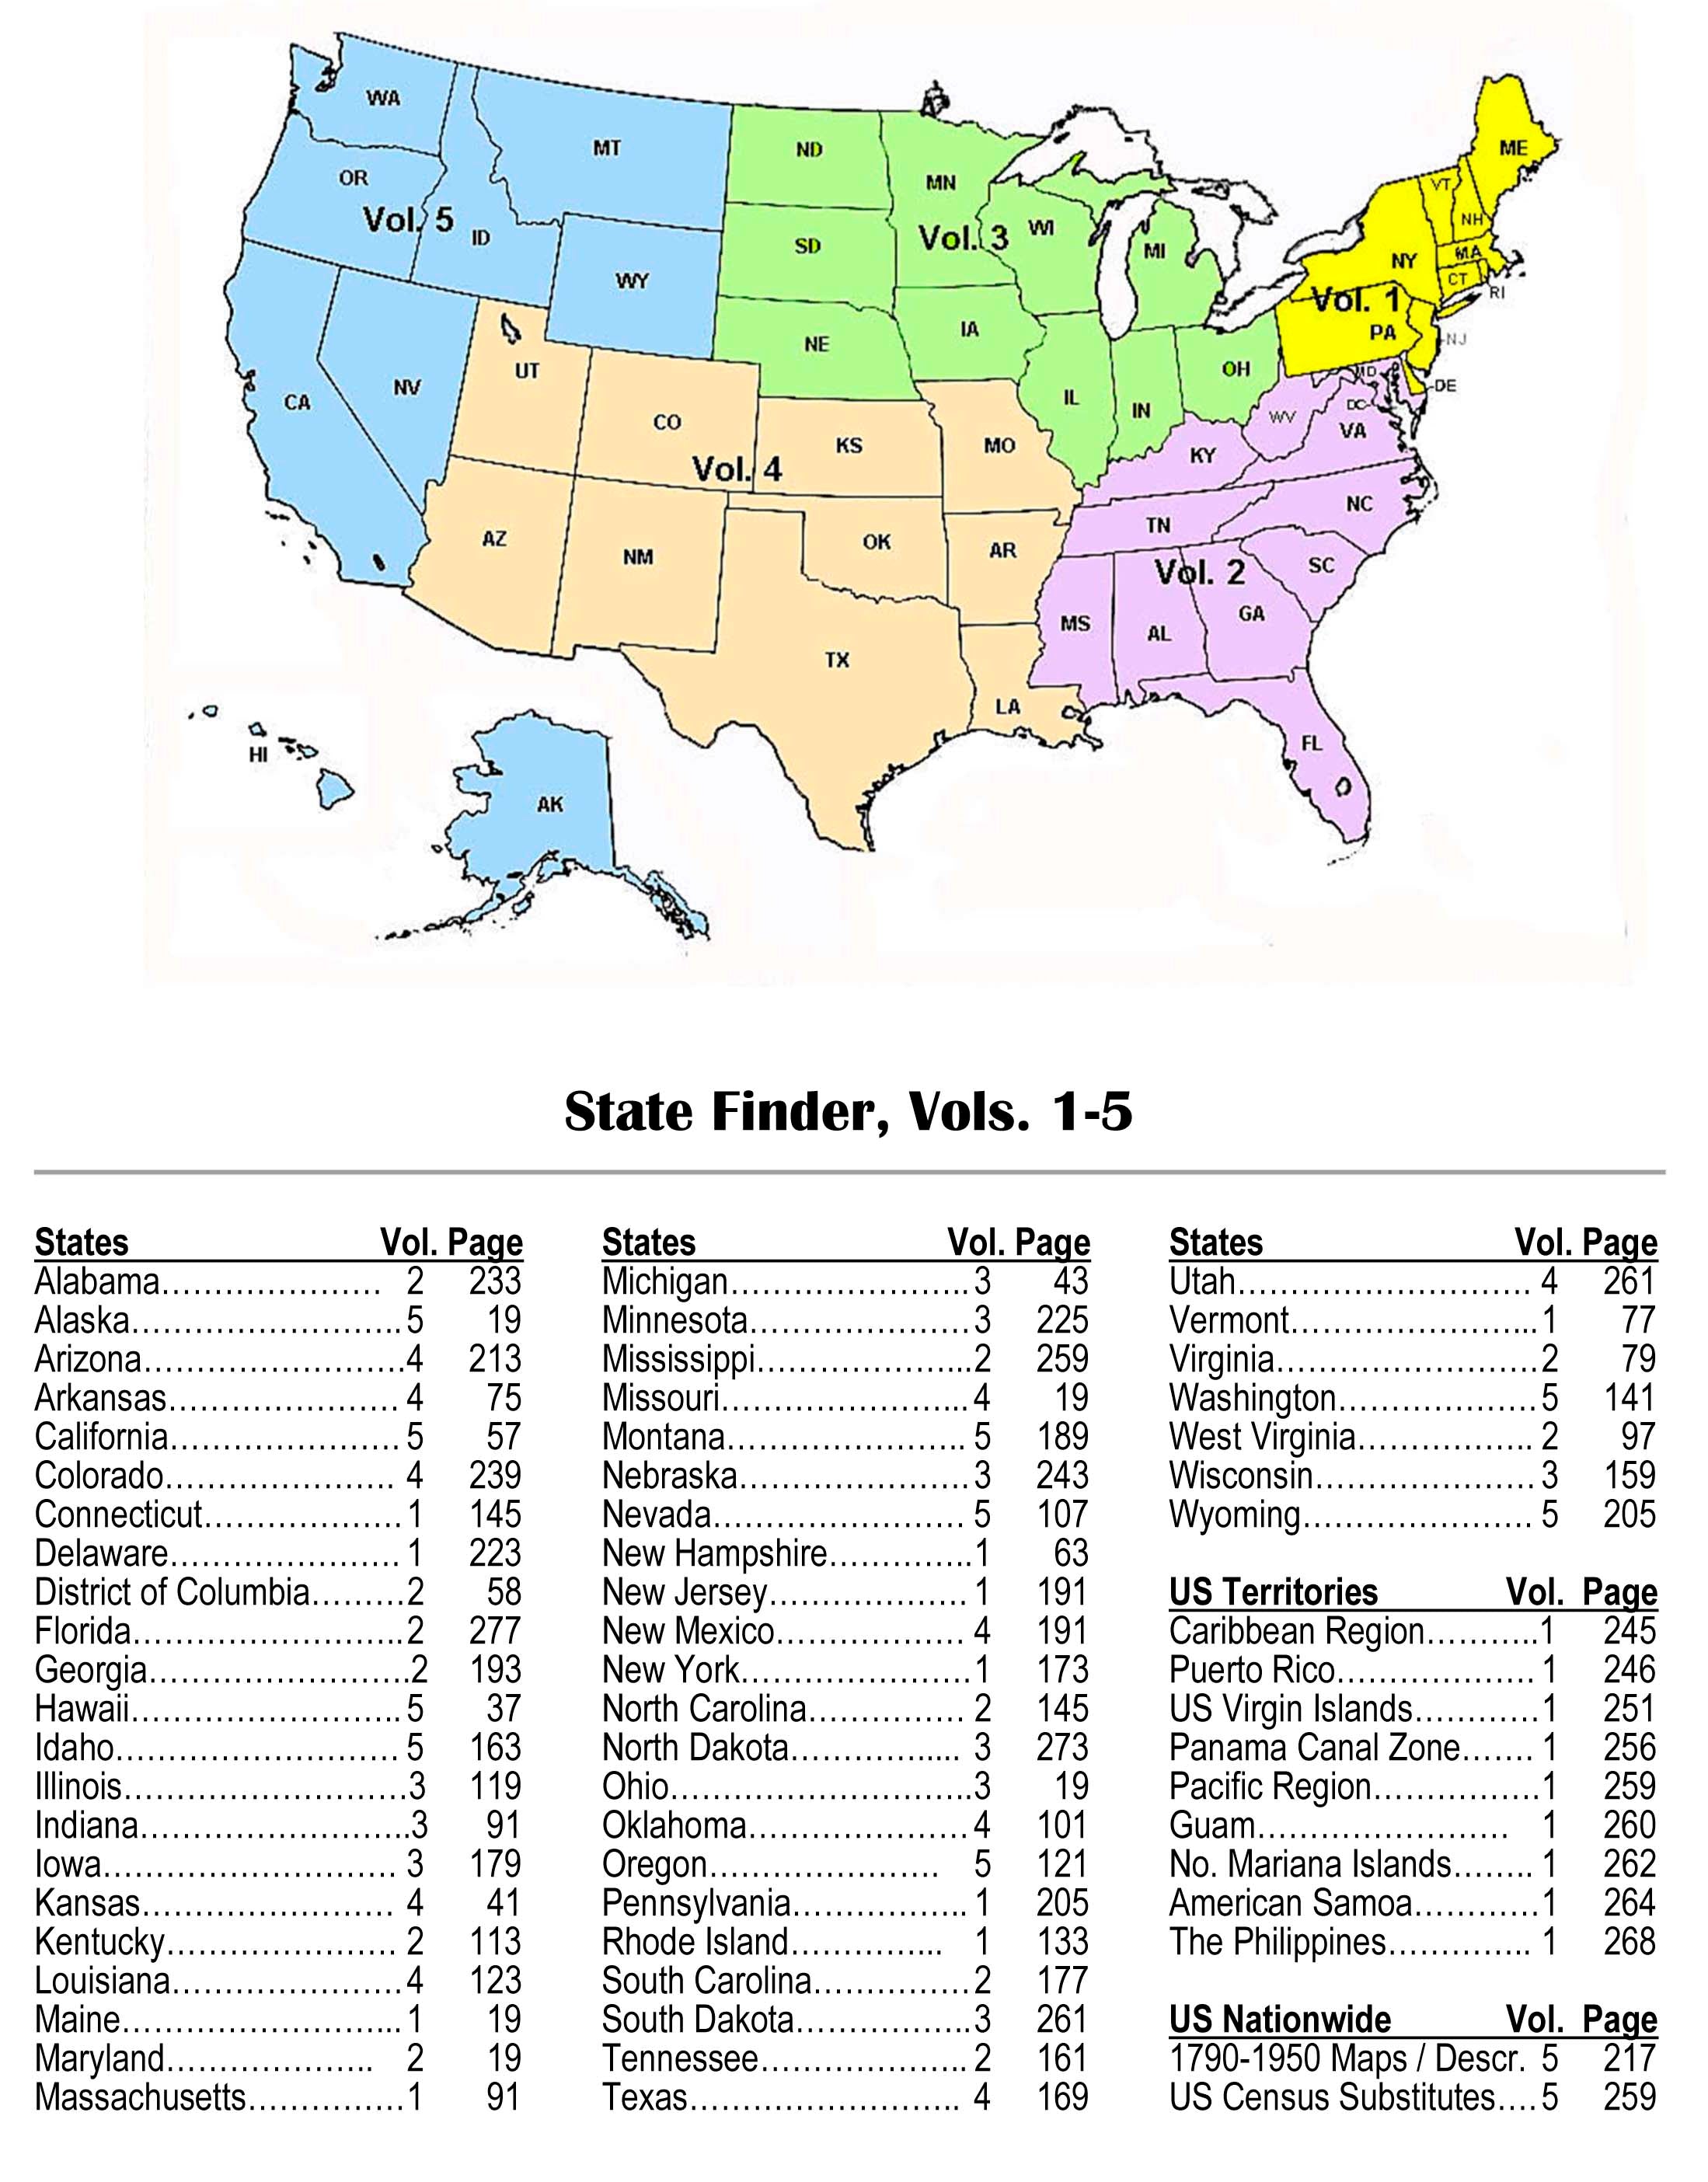 Census Substitutes & State Census Records, Third Edition, Volume 2 - Southeastern States (BUNDLE: Printed Book & PDF eBook)